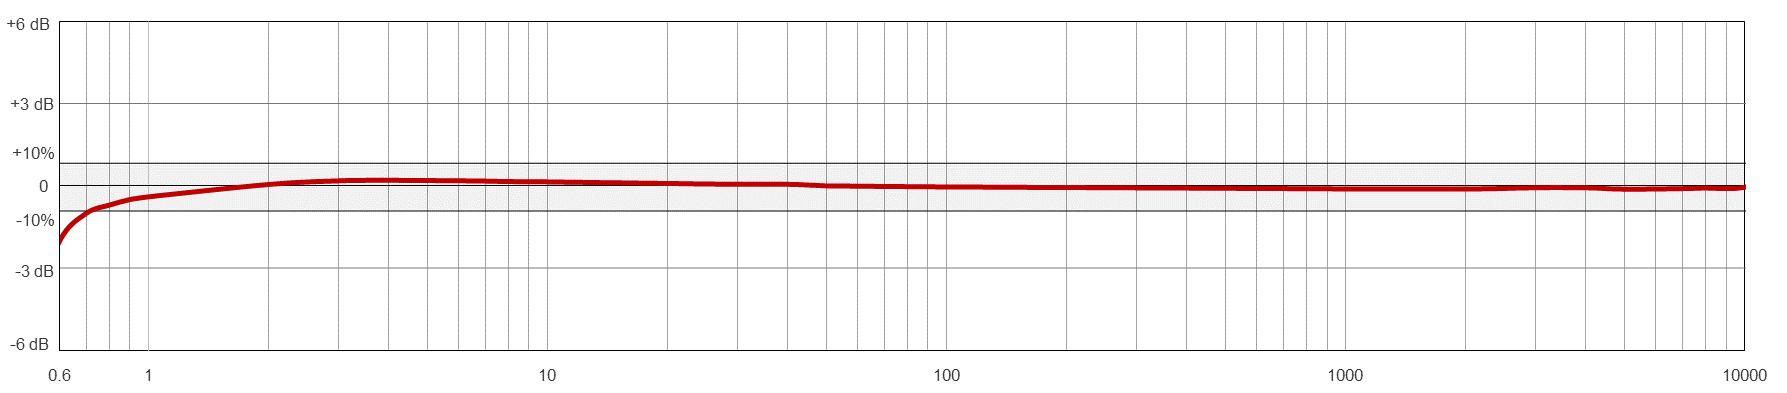 A line graph showing the frequency resopnse of a CTC AC230 condition monitoring sensor.